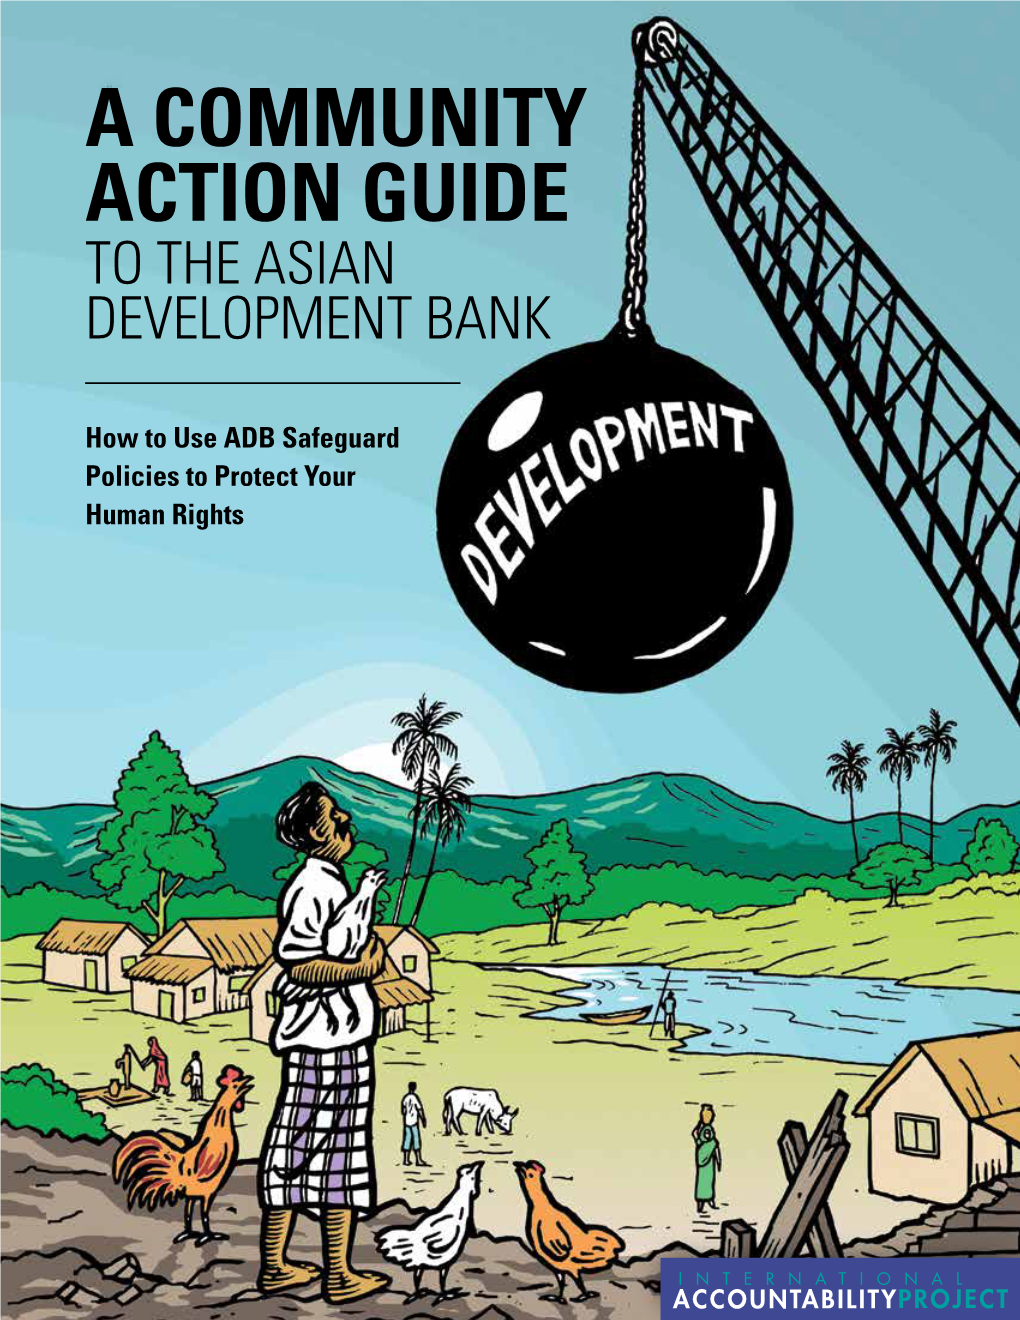 A Community Action Guide to the Asian Development Bank